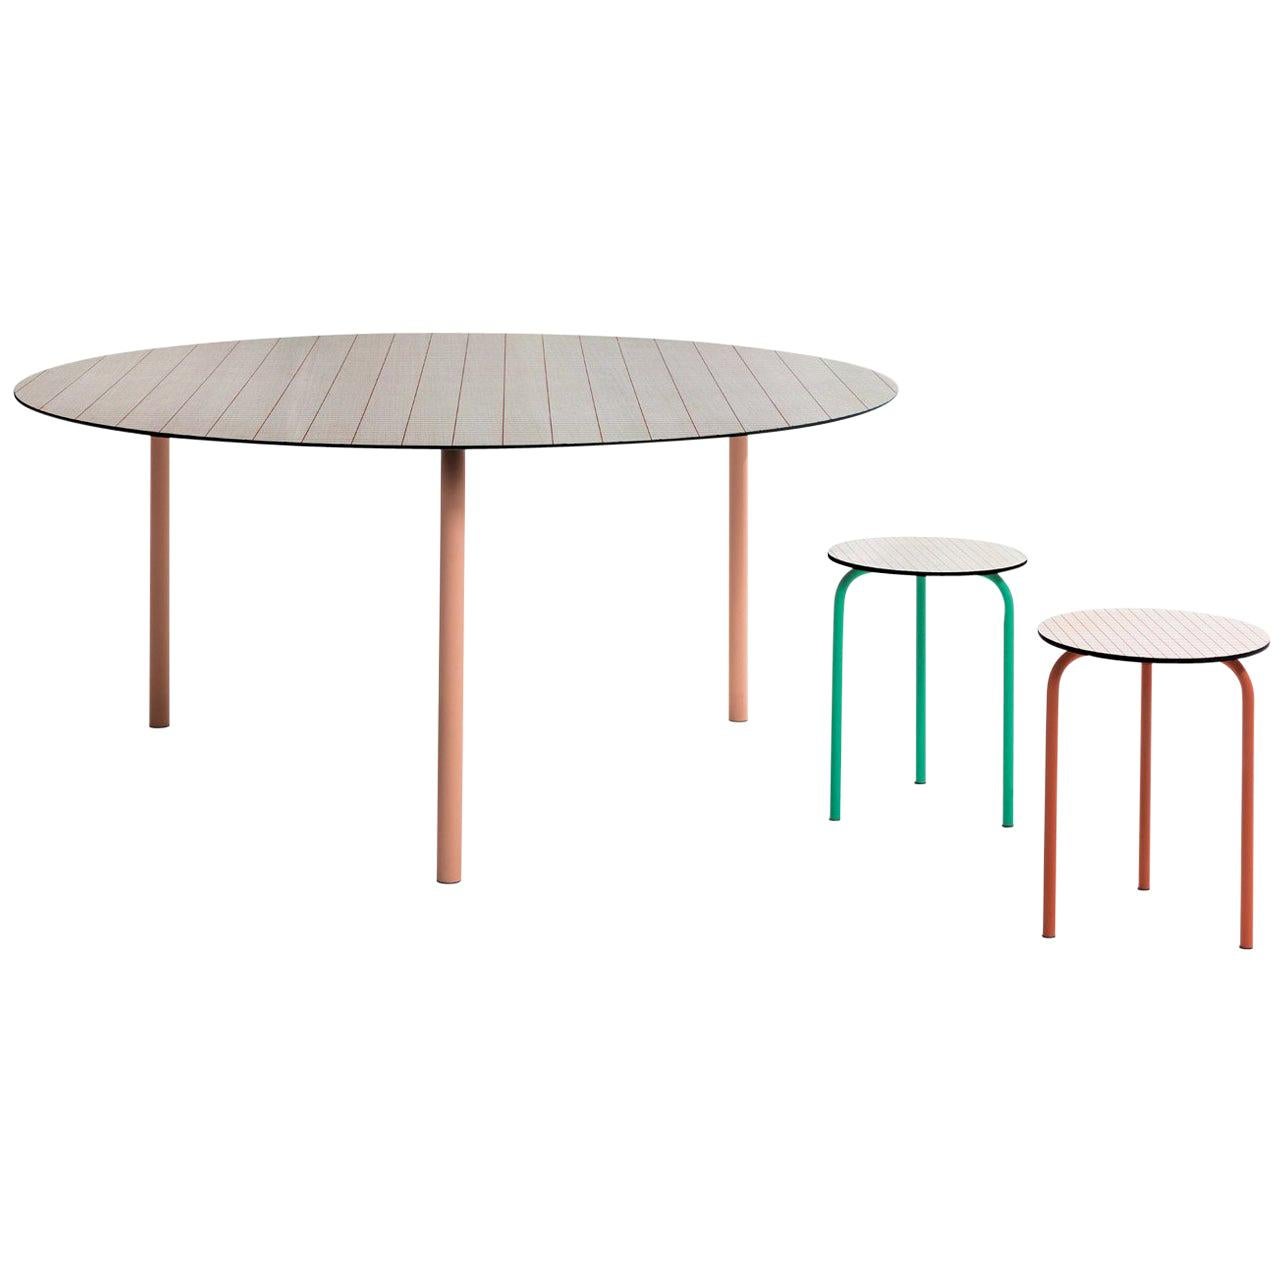 Contemporary Table Check Surface Texture Printed, Bauhaus-Inspired Structure im Angebot